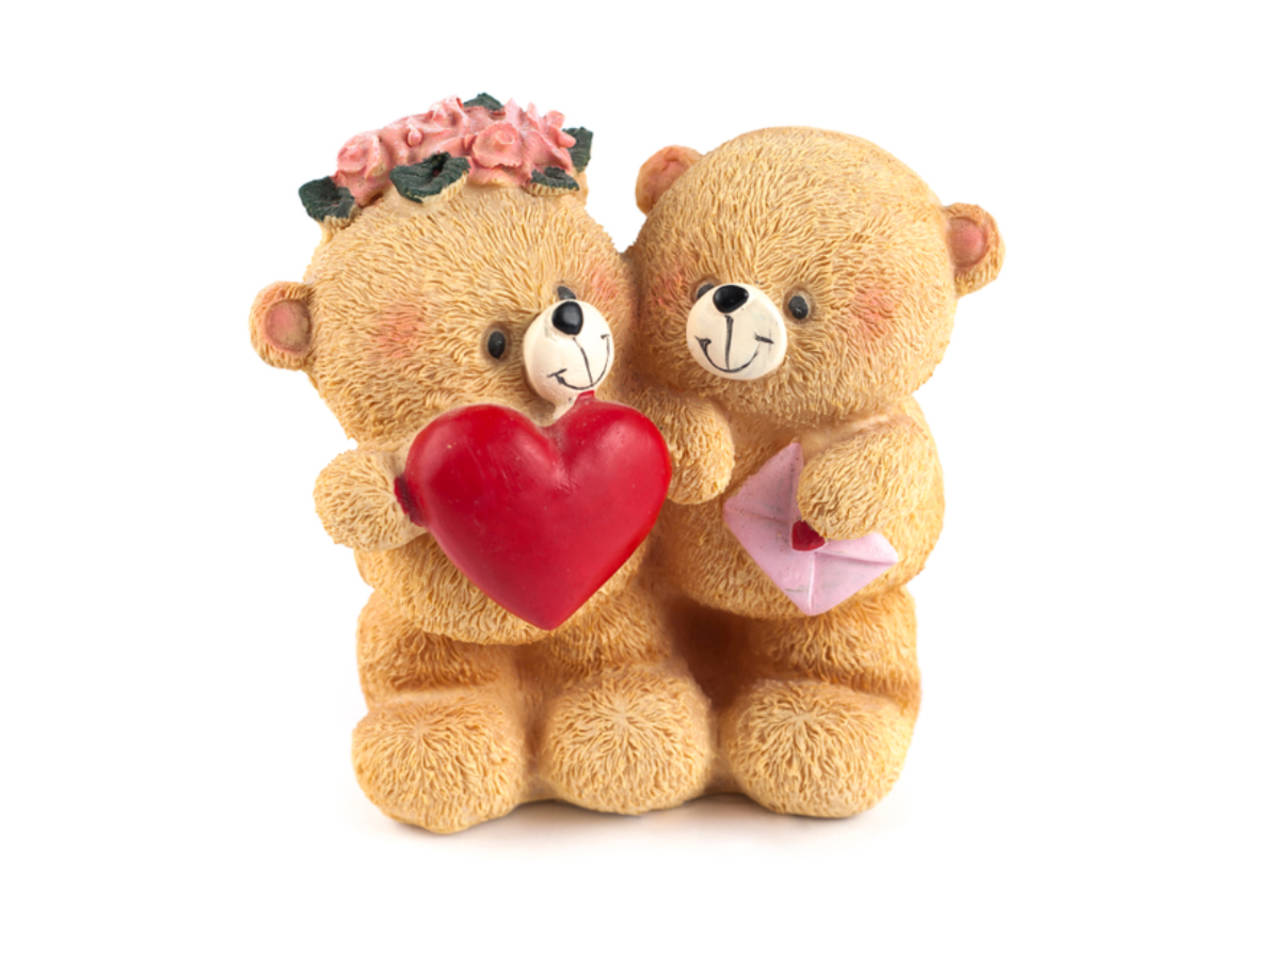 Happy Teddy Day 2019: Wishes, Messages, Quotes, Images, Facebook ...